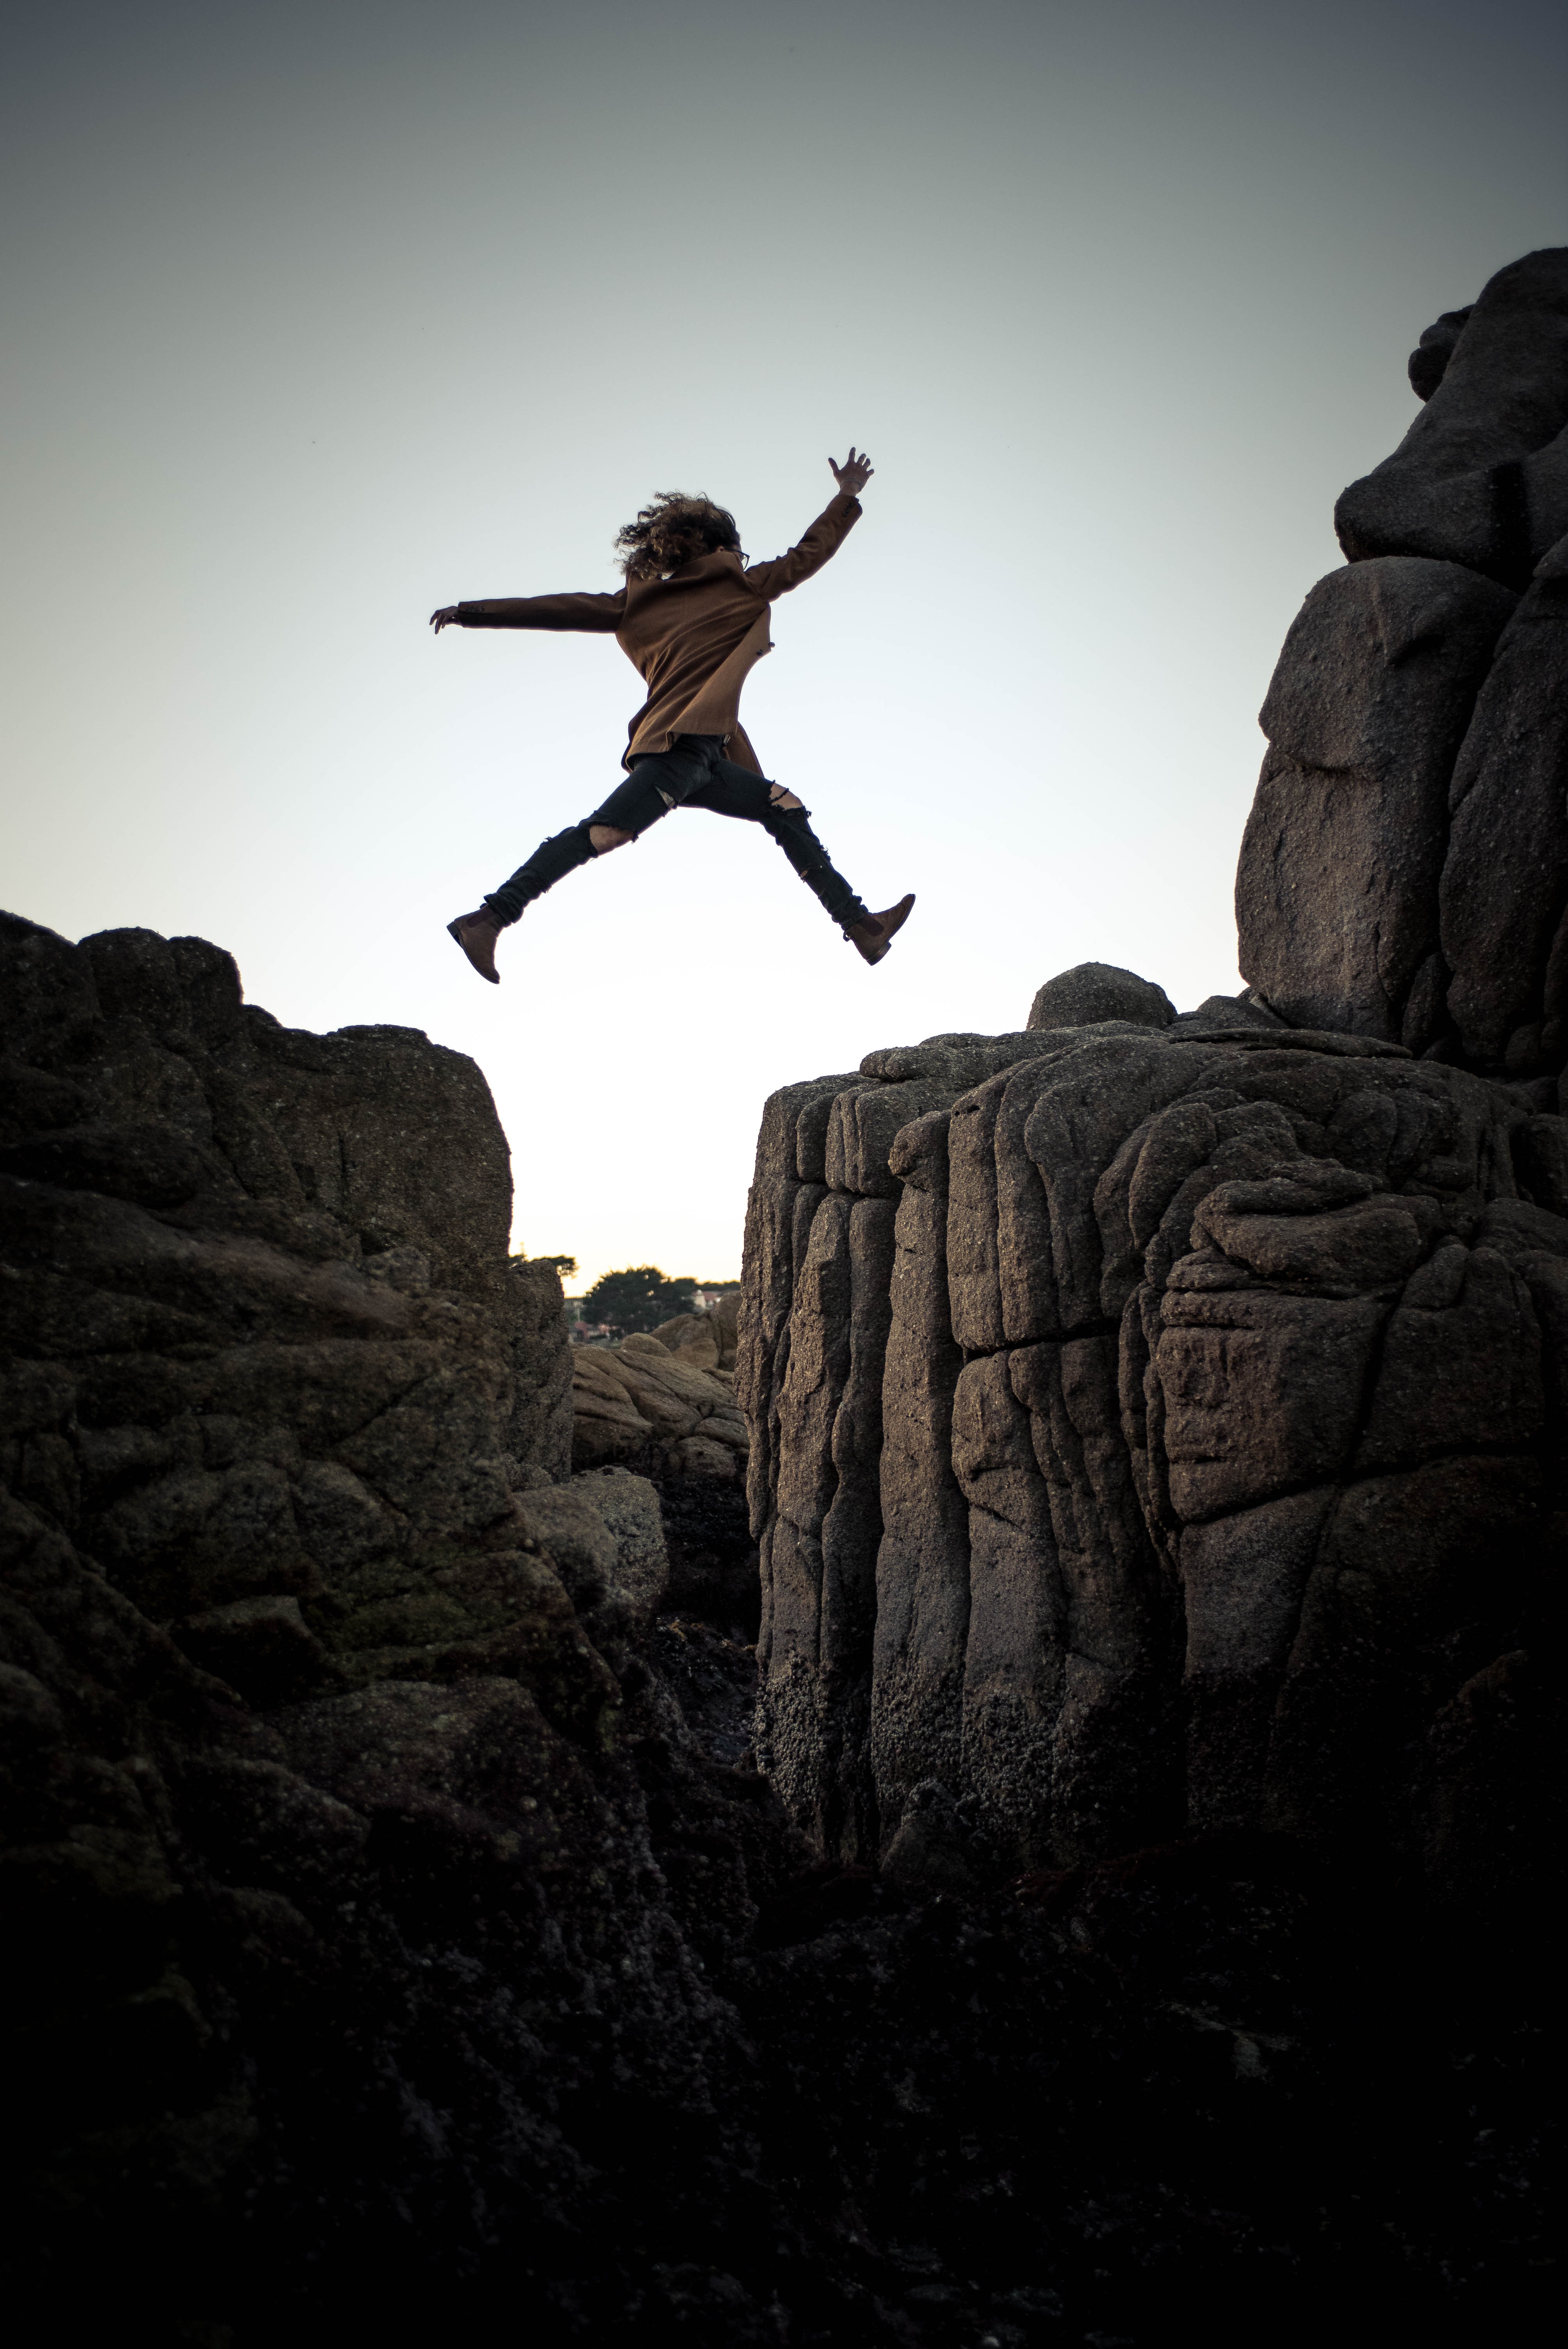 A woman jumps off a cliff into the sunset.